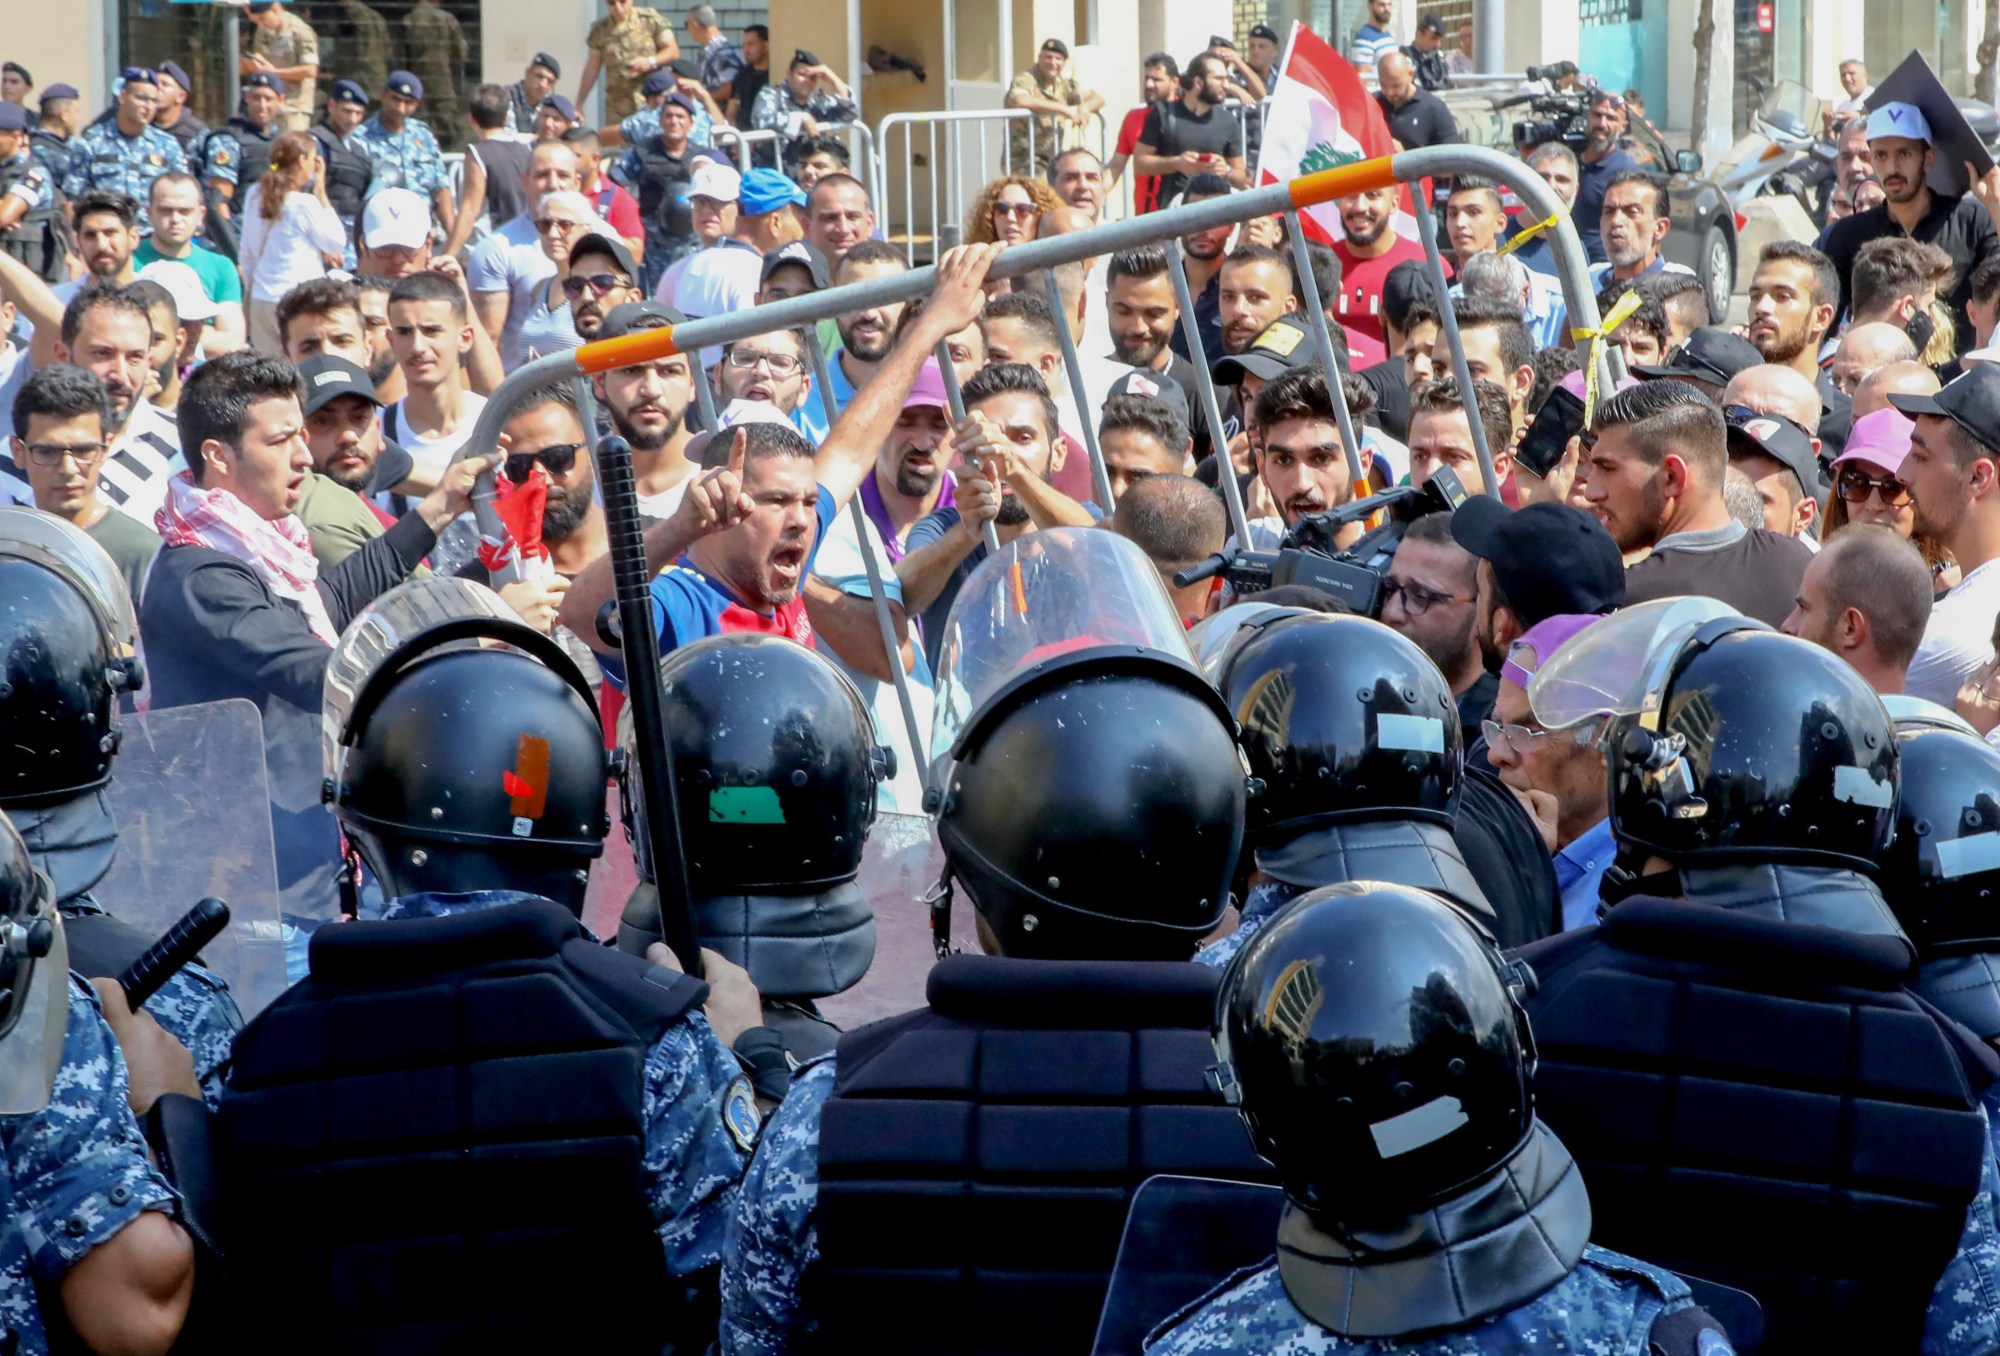 Lebanese protesters clash with riot policemen during a demonstration in central Beirut's Martyr Square on 29 September 2019 (AFP)